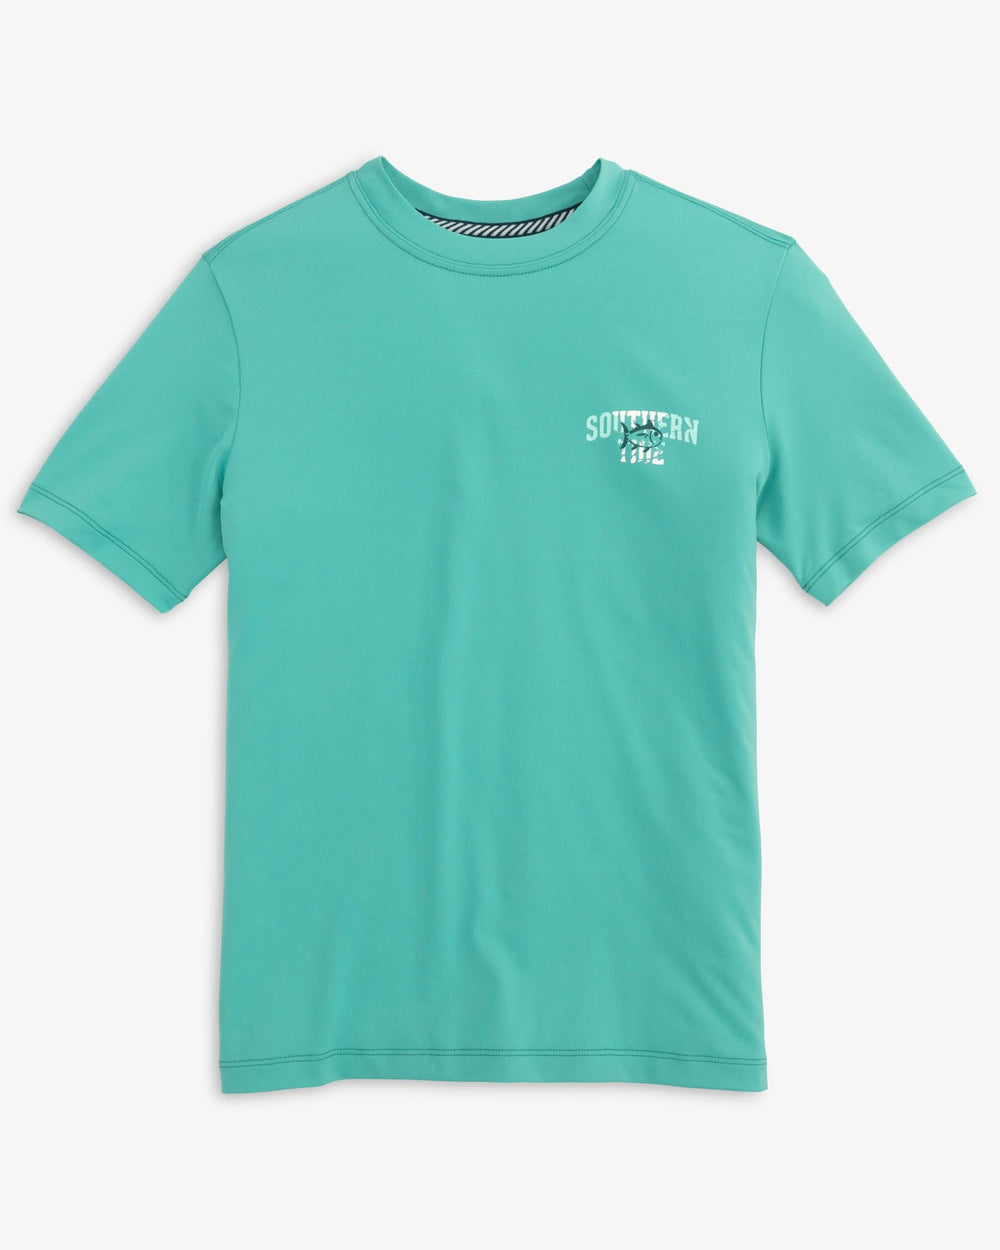 The front view of the Southern Tide Youth Skipjack Breakthrough Performance T-Shirt by Southern Tide - Tidal Wave